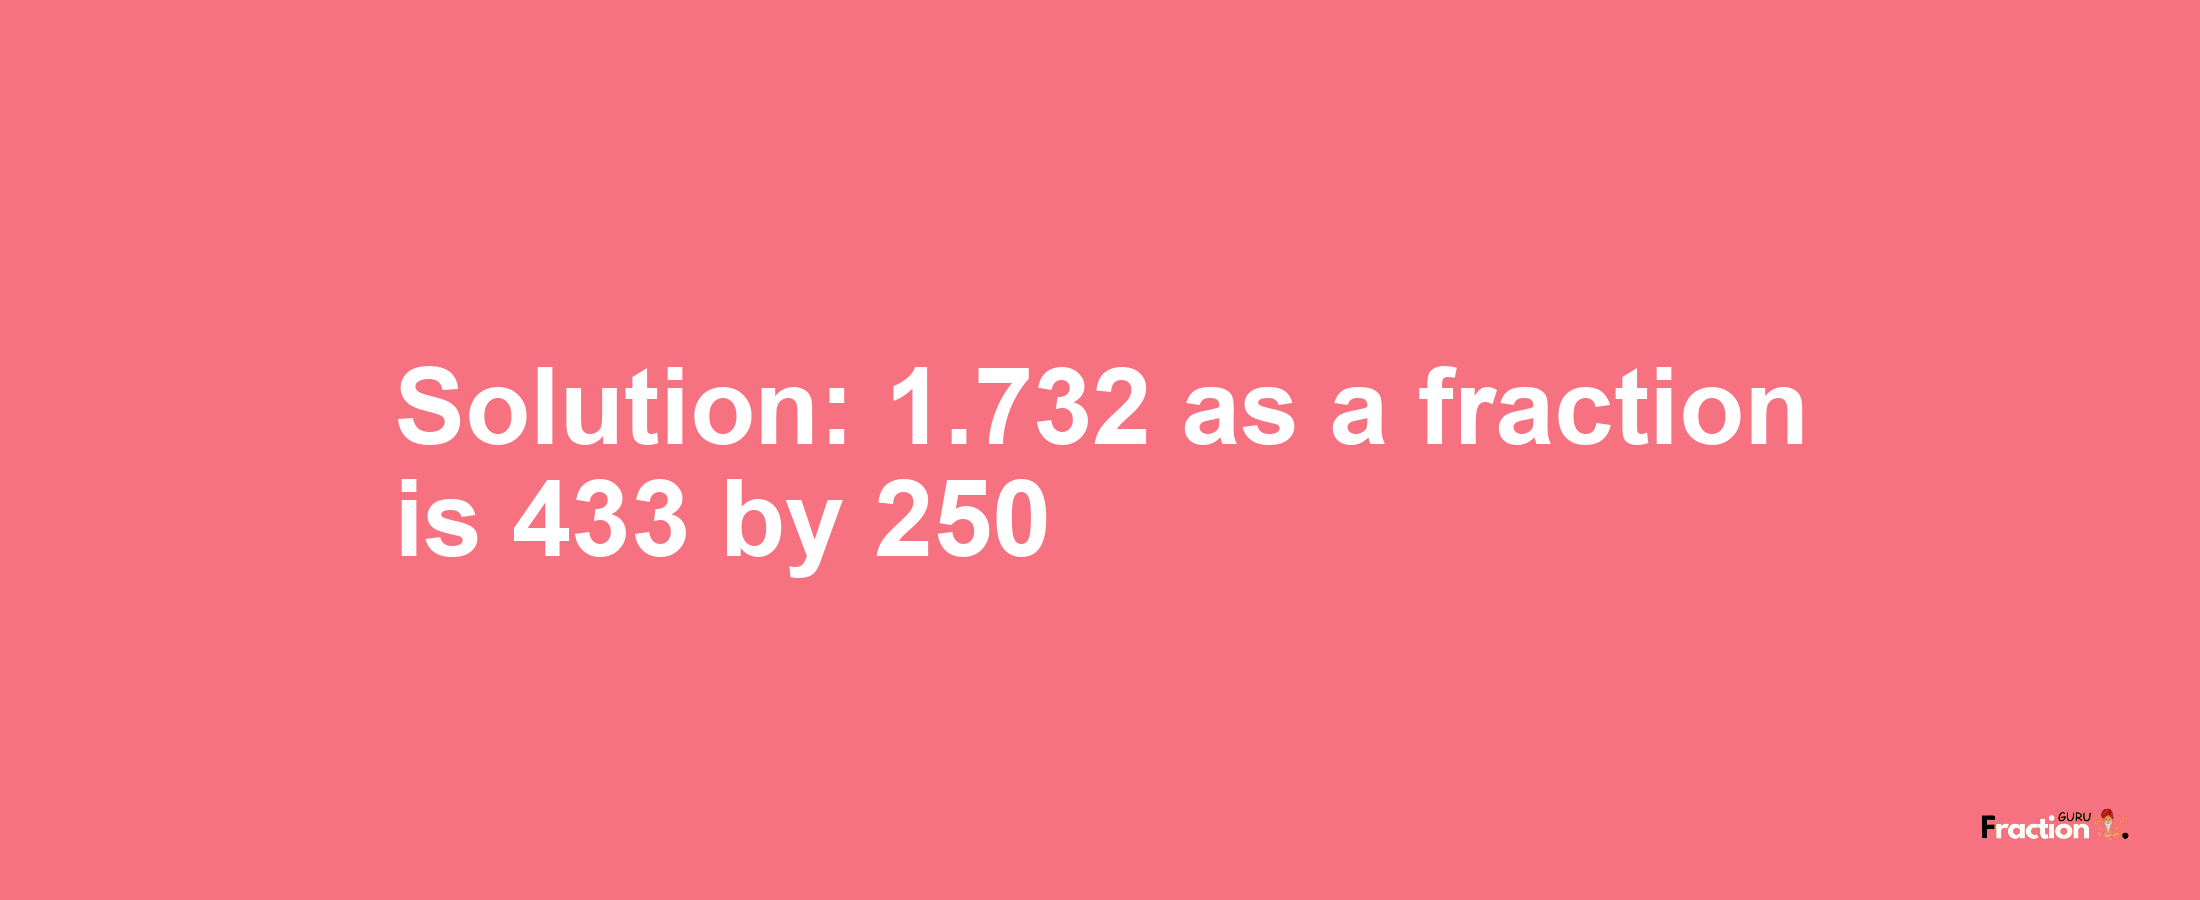 Solution:1.732 as a fraction is 433/250